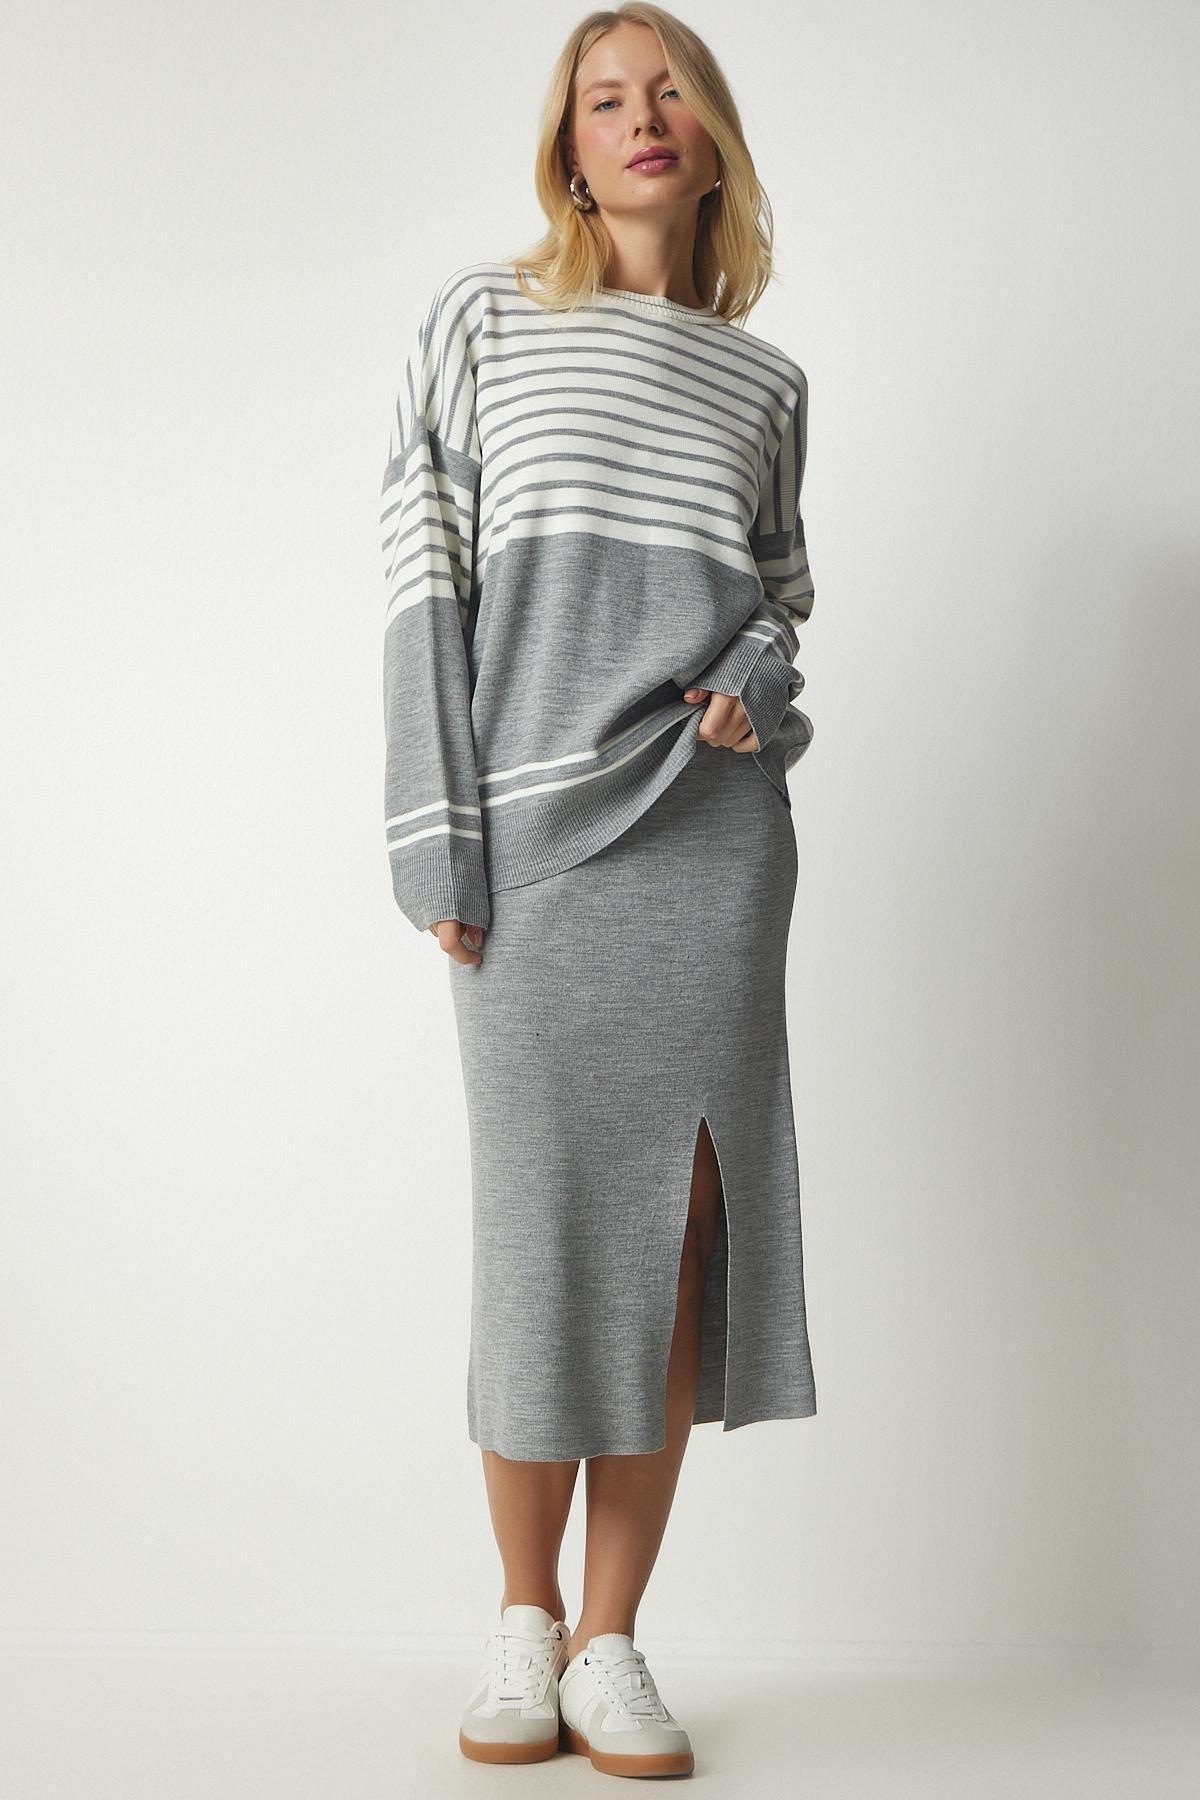 Happiness Istanbul - Grey Striped Sweater Skirt Knitwear Co-Ord Set